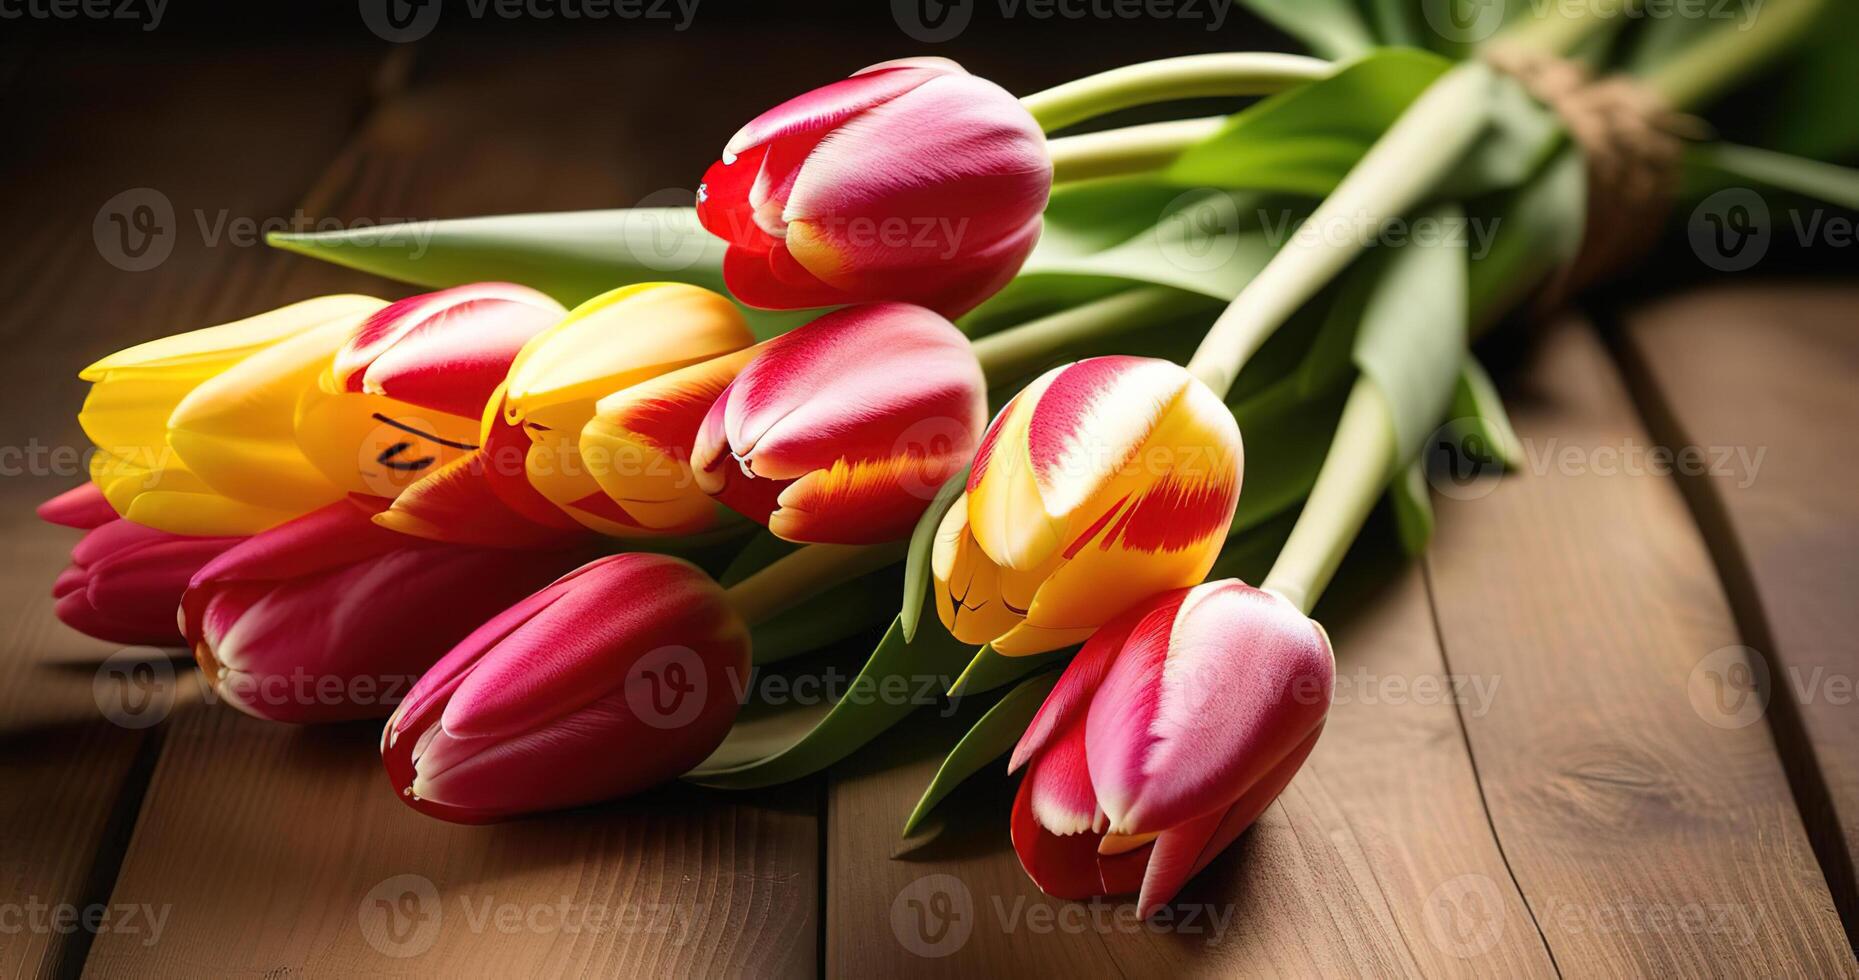 Spring flowers tulips banner copy space on wooden background table pink red yellow bouquet lying photo